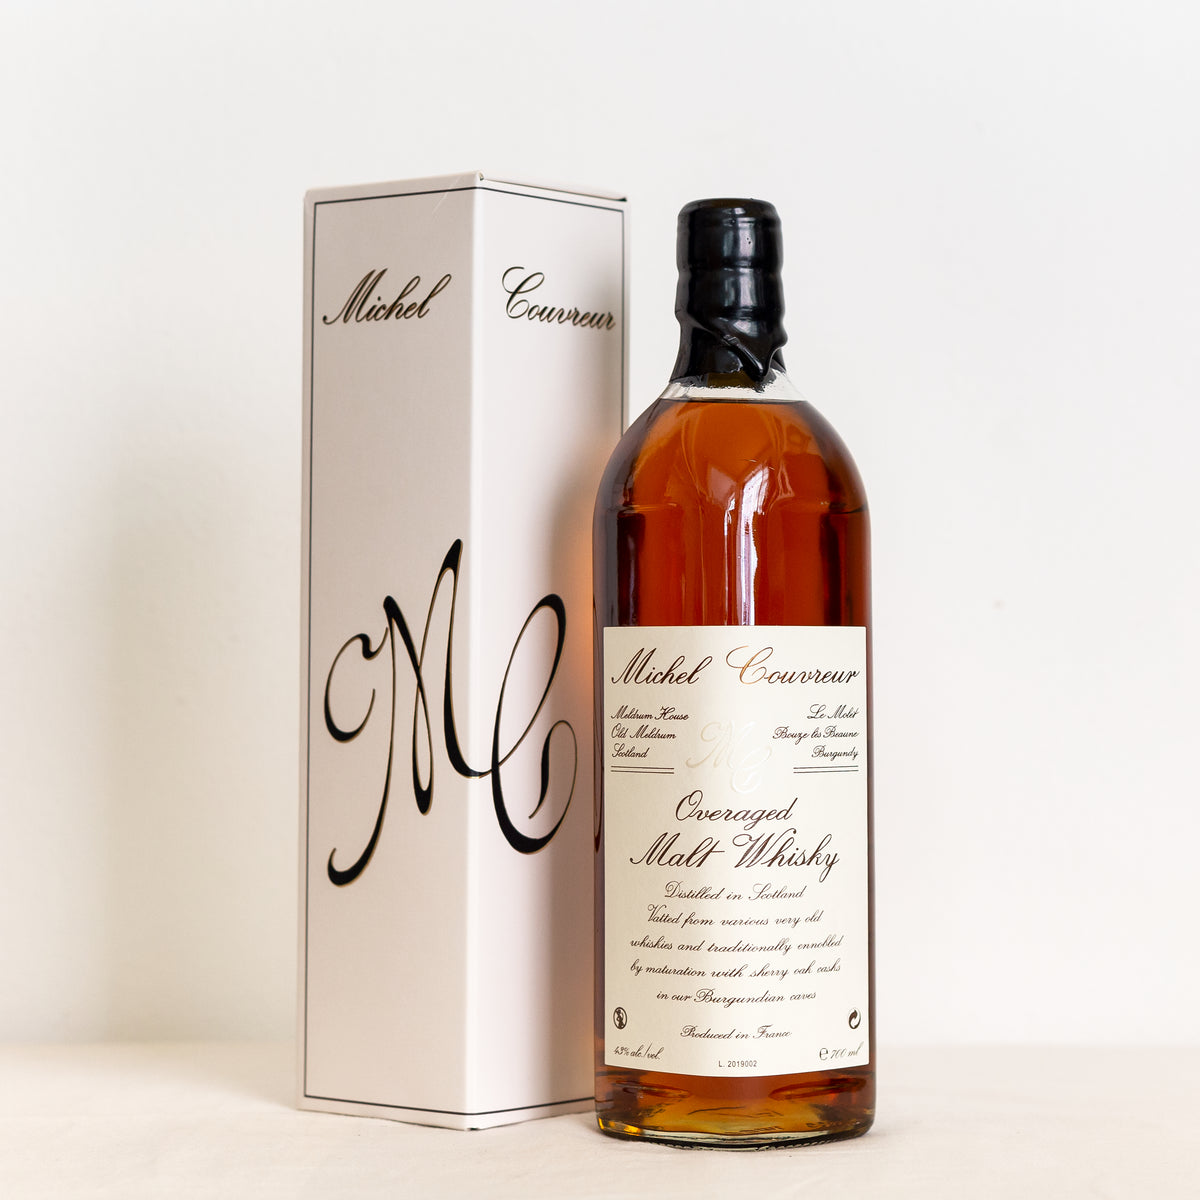 
  MICHEL COUVREUR WHISKY / Overaged malt 43 % FRANCE – Ladidadi Wines
  